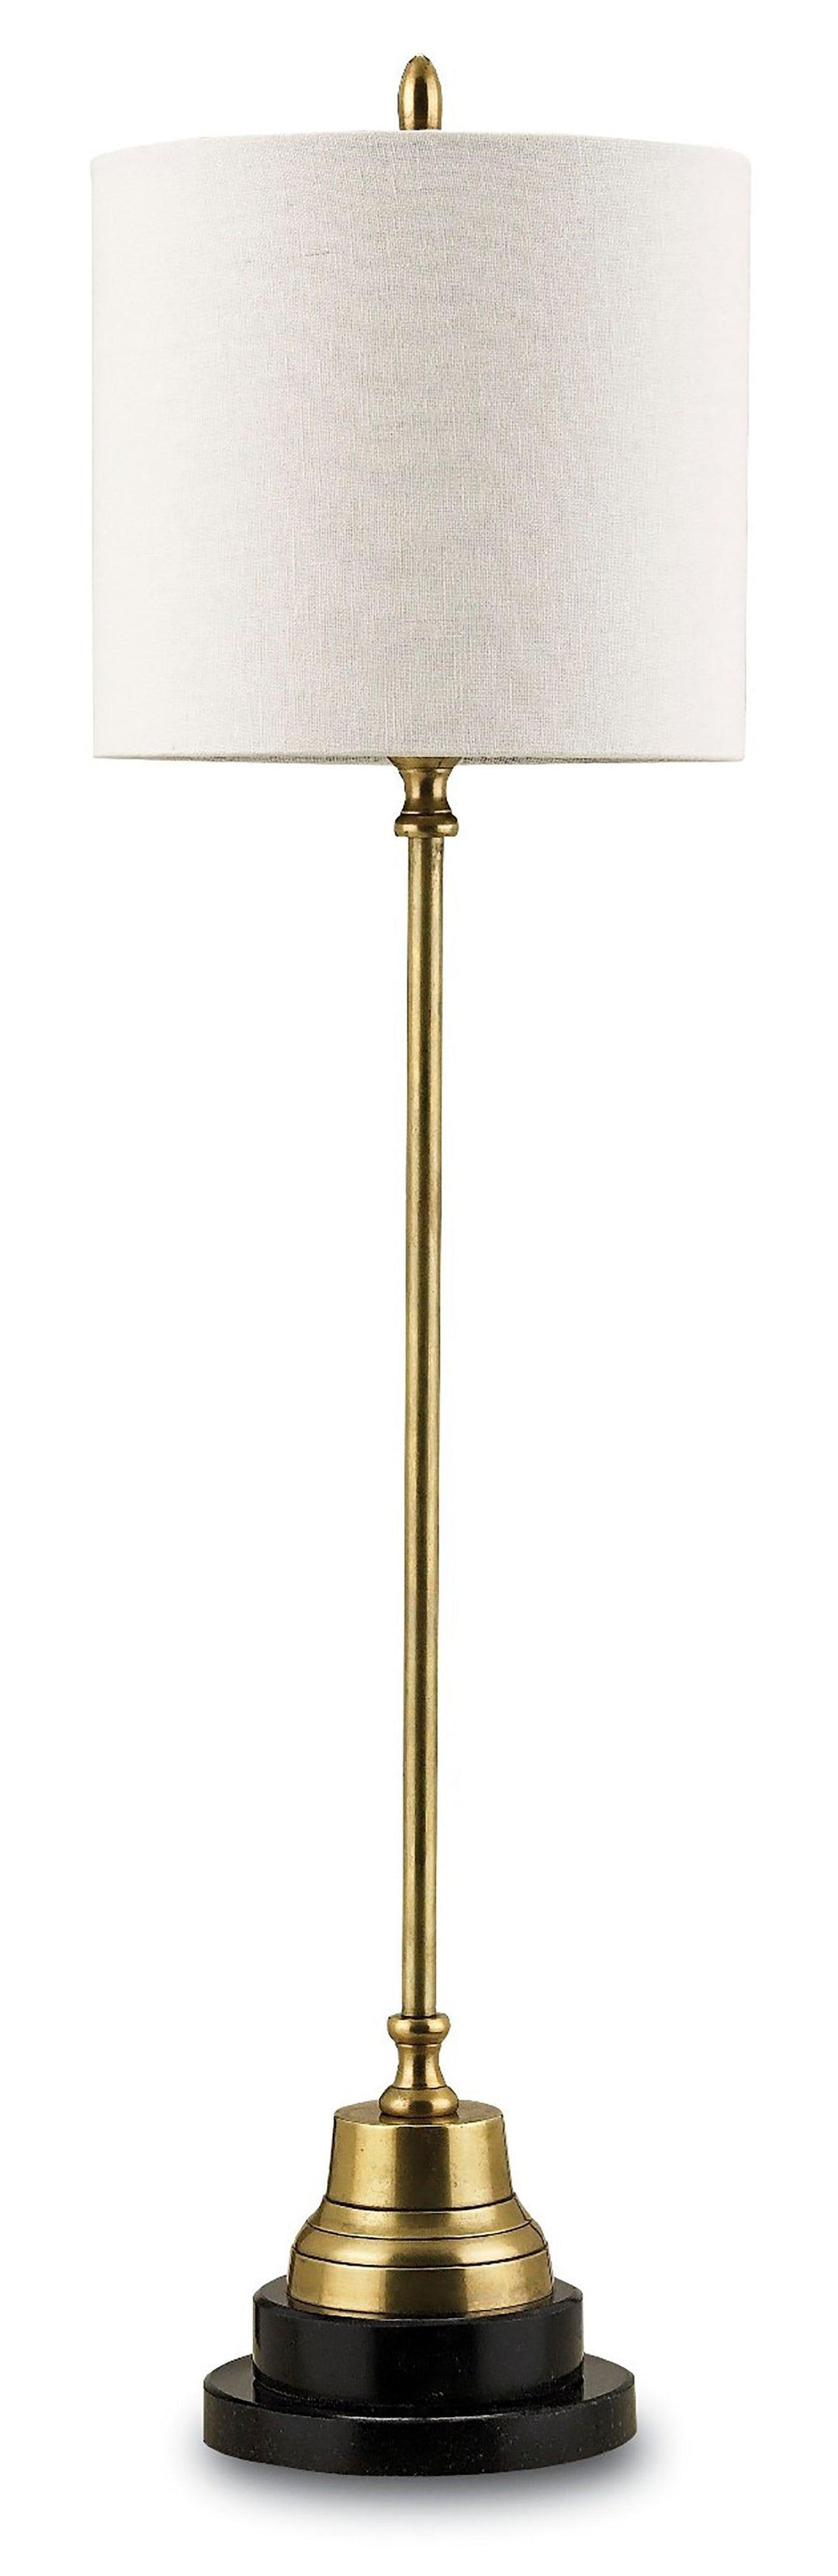 Messenger Brass Table Lamp - Casey & Company